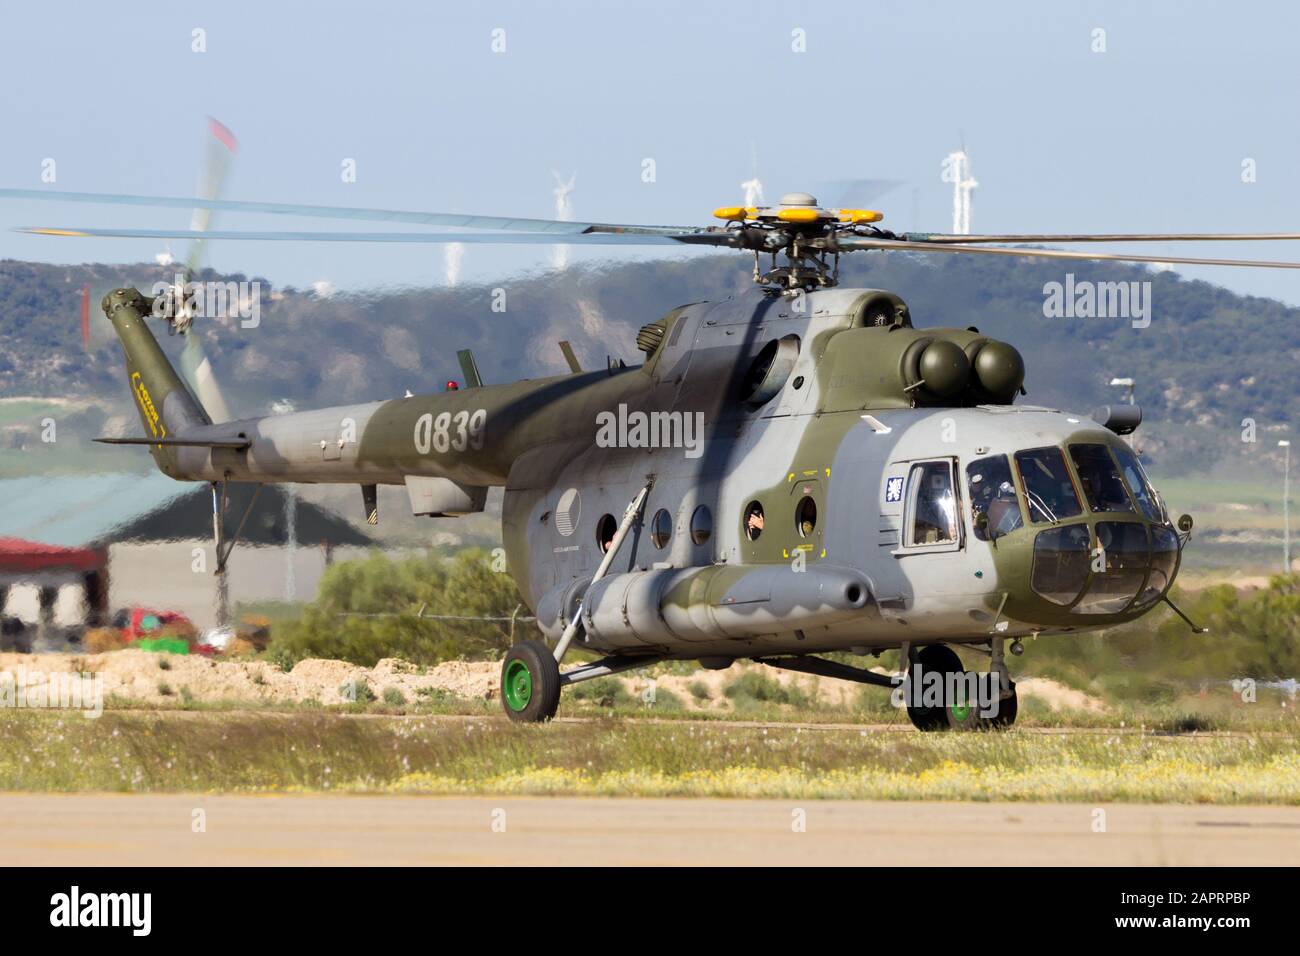 ZARAGOZA, SPAIN - MAY 20,2016: Czech Republic Air Force Mil Mi-171 helicopter taking off from Zaragoza airbase. Stock Photo